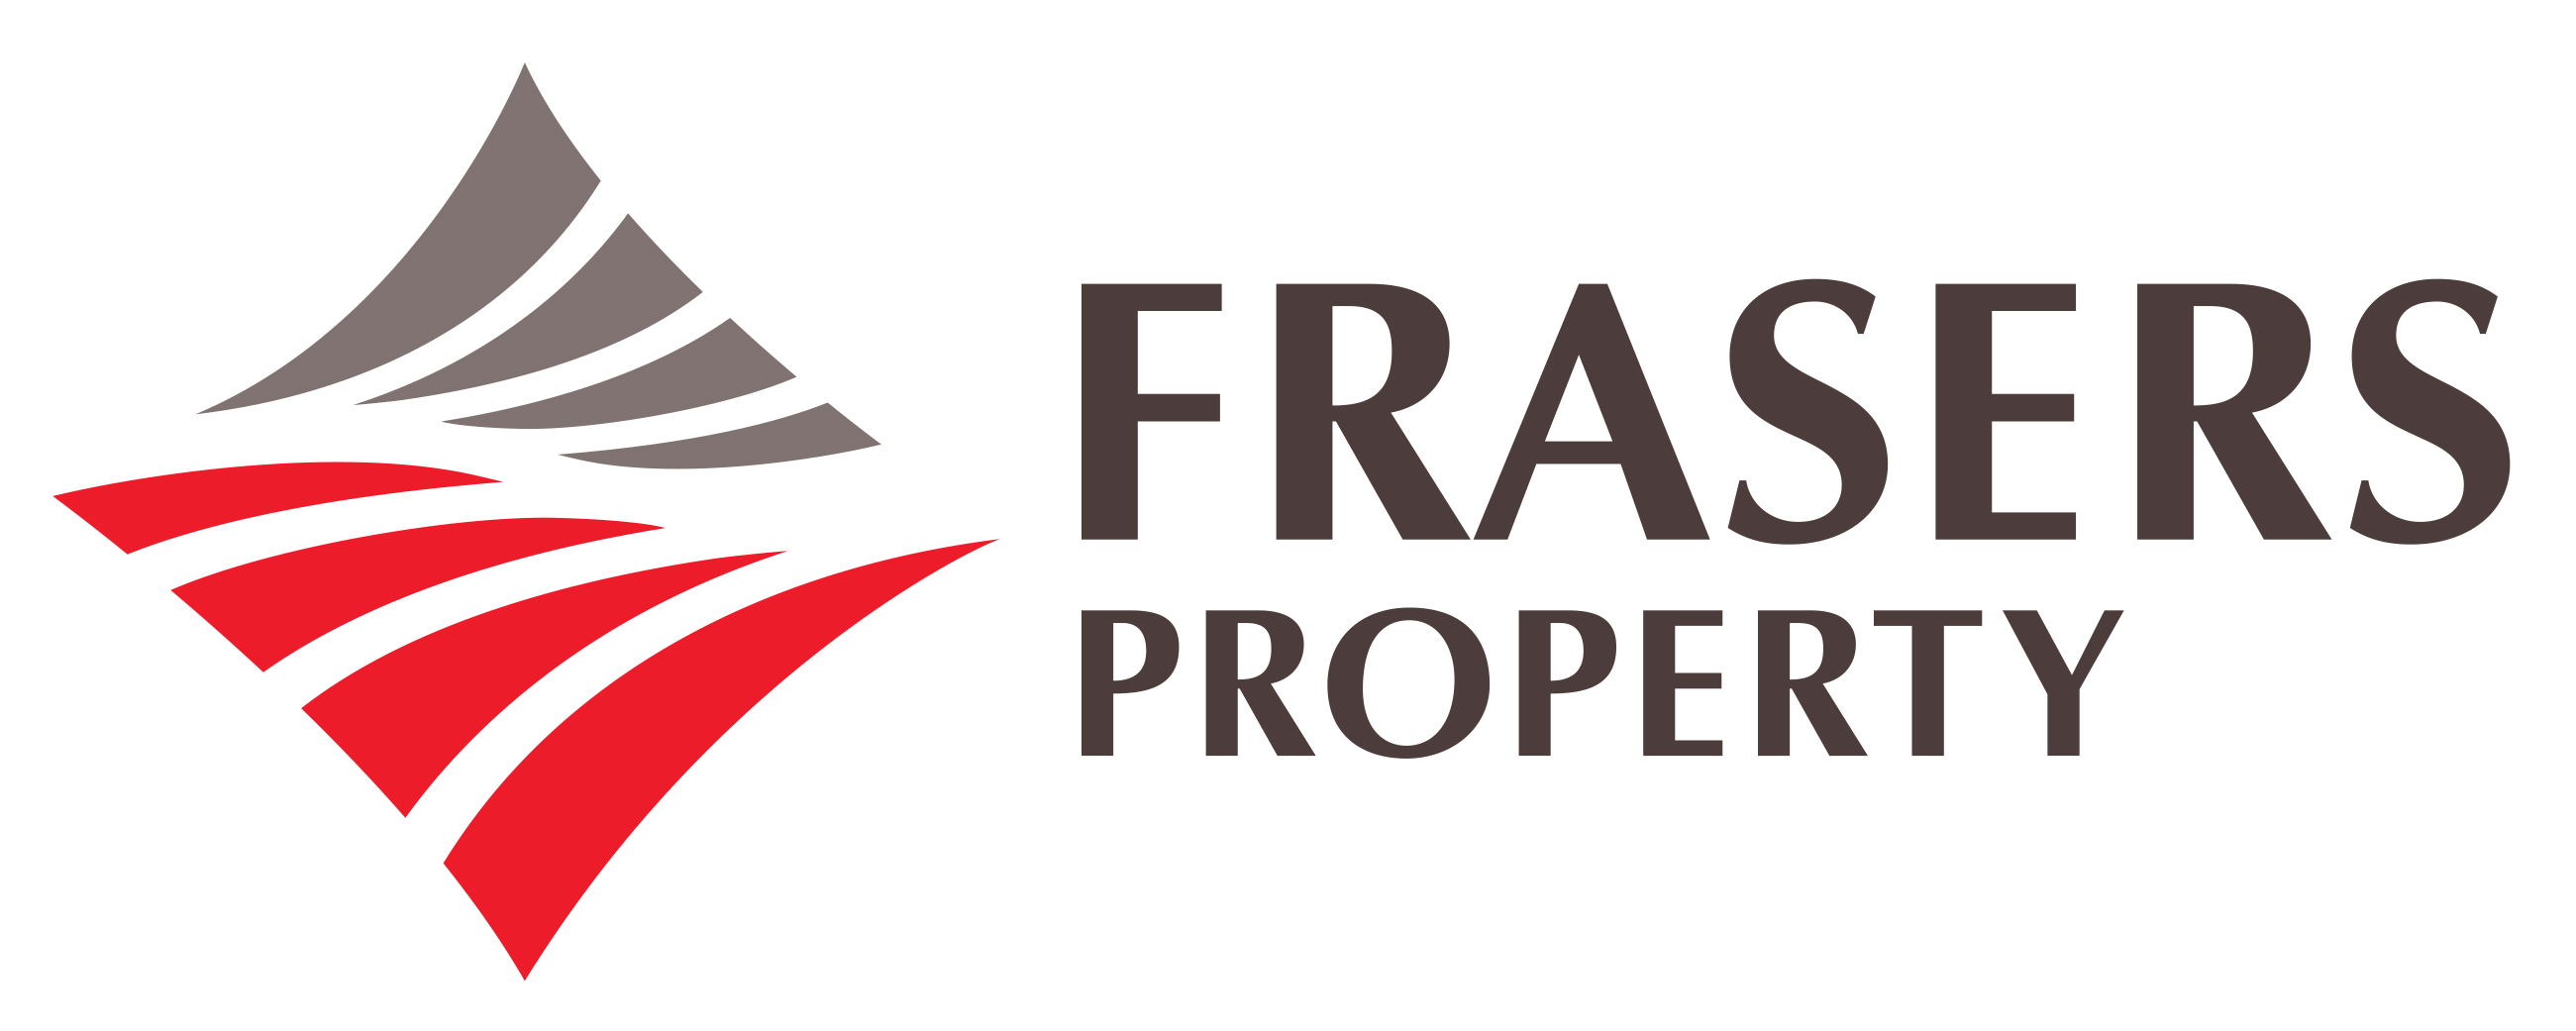 CIMB: Frasers Property Limited – ADD TP $1.41